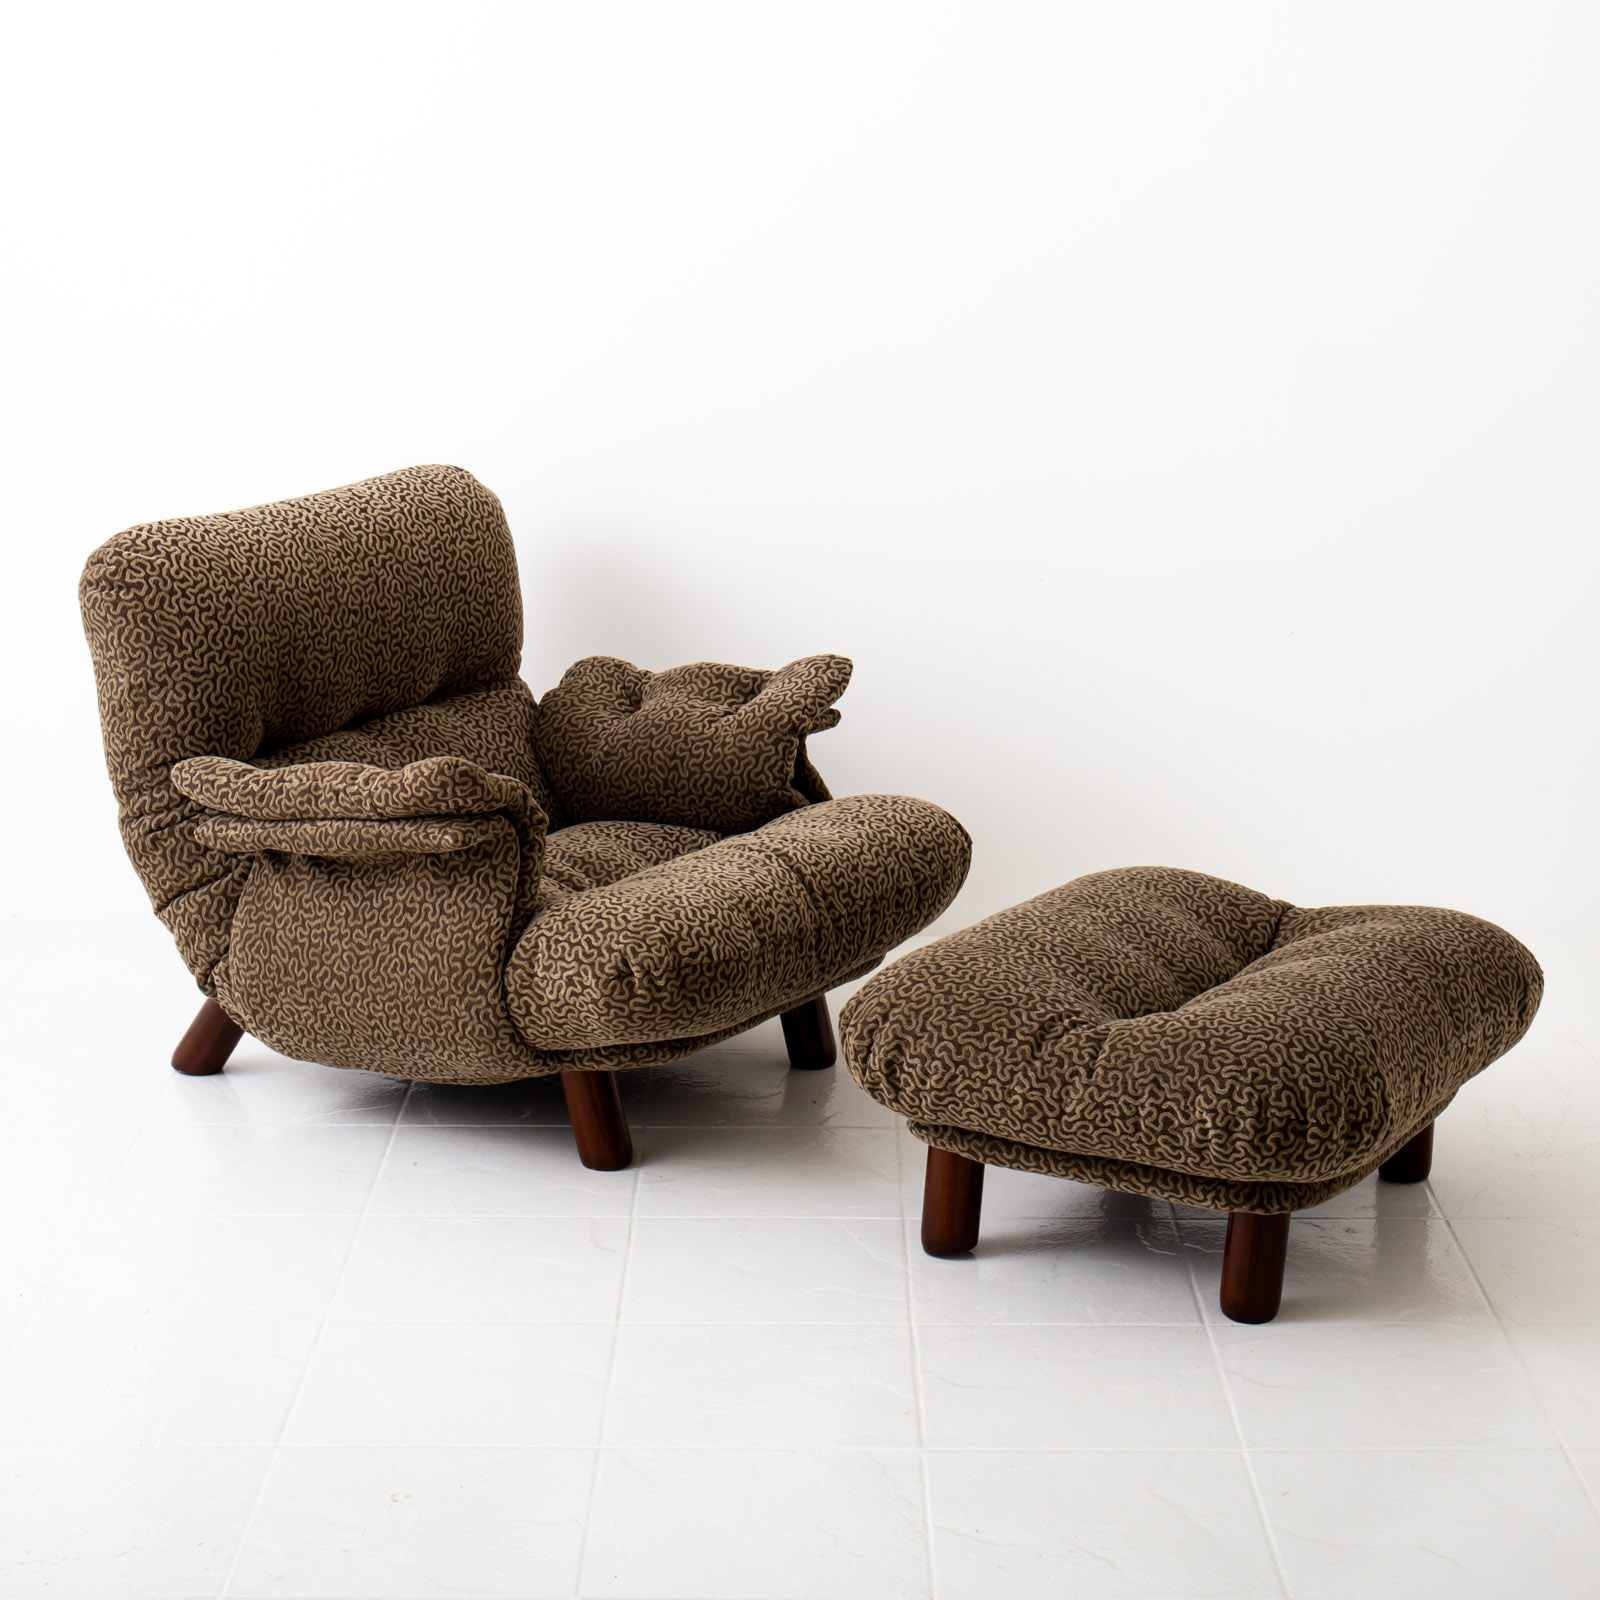 INSA Chair and Footstool